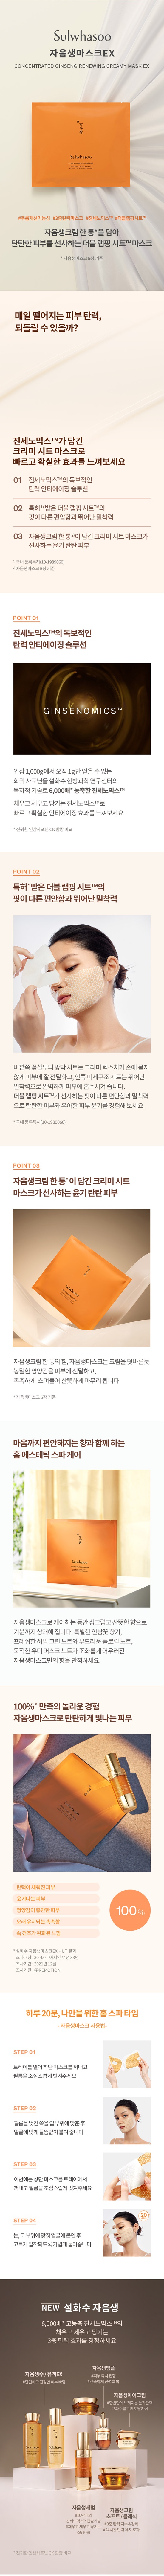 sulwhasoo-concentrated-ginseng-renewing-creamy-mask-ex-info.jpg